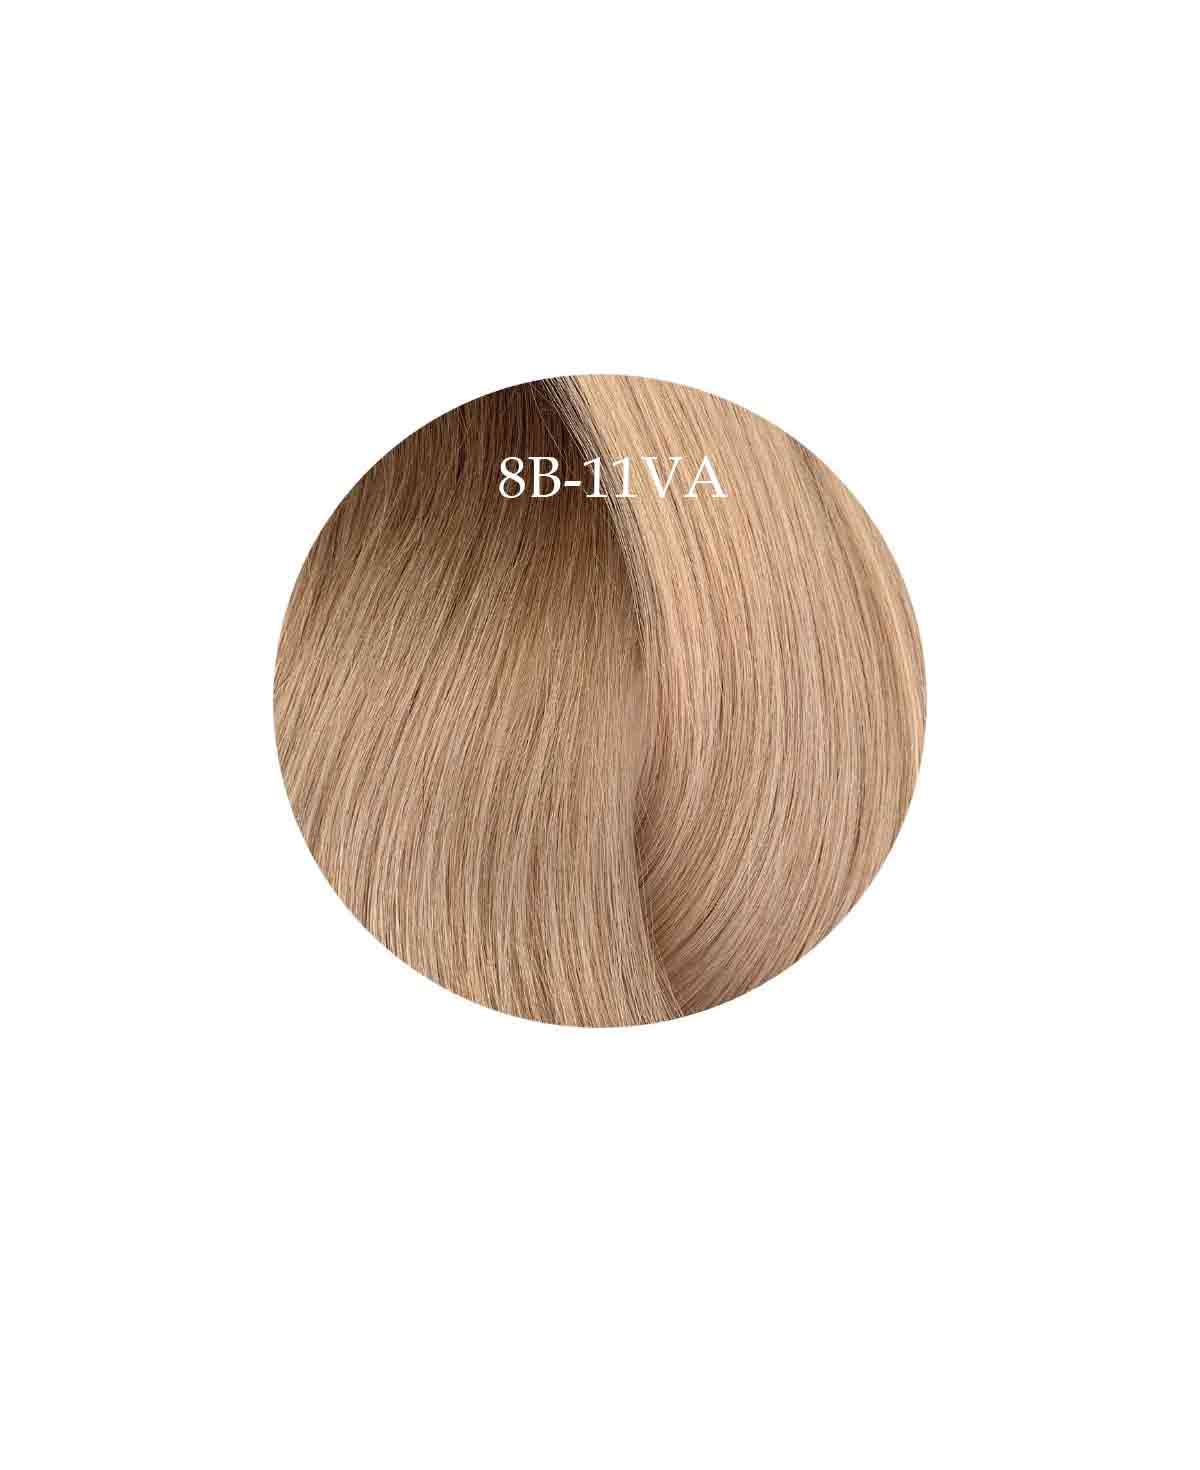 Showpony 45-50cm (20") 3 in 1 HALO Hair Exstension - Ombre - 8B-11VA Cool Soft Beige 